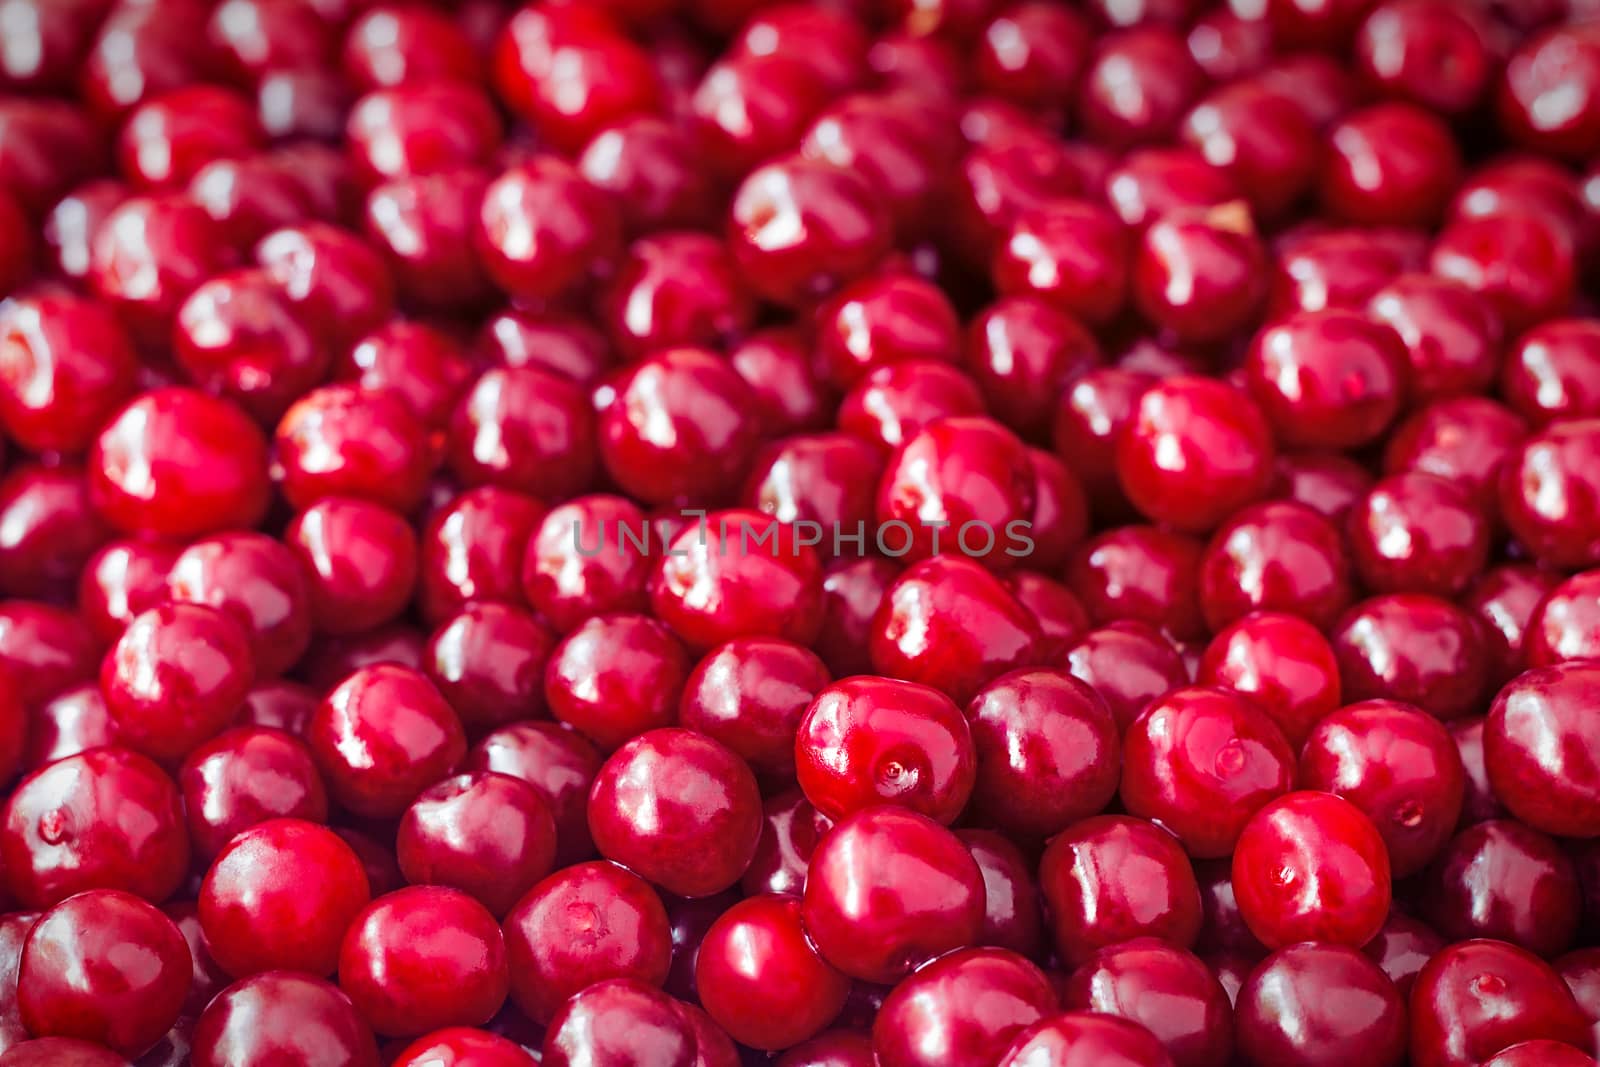 Large number of large ripe fruits of cherry (the background image)